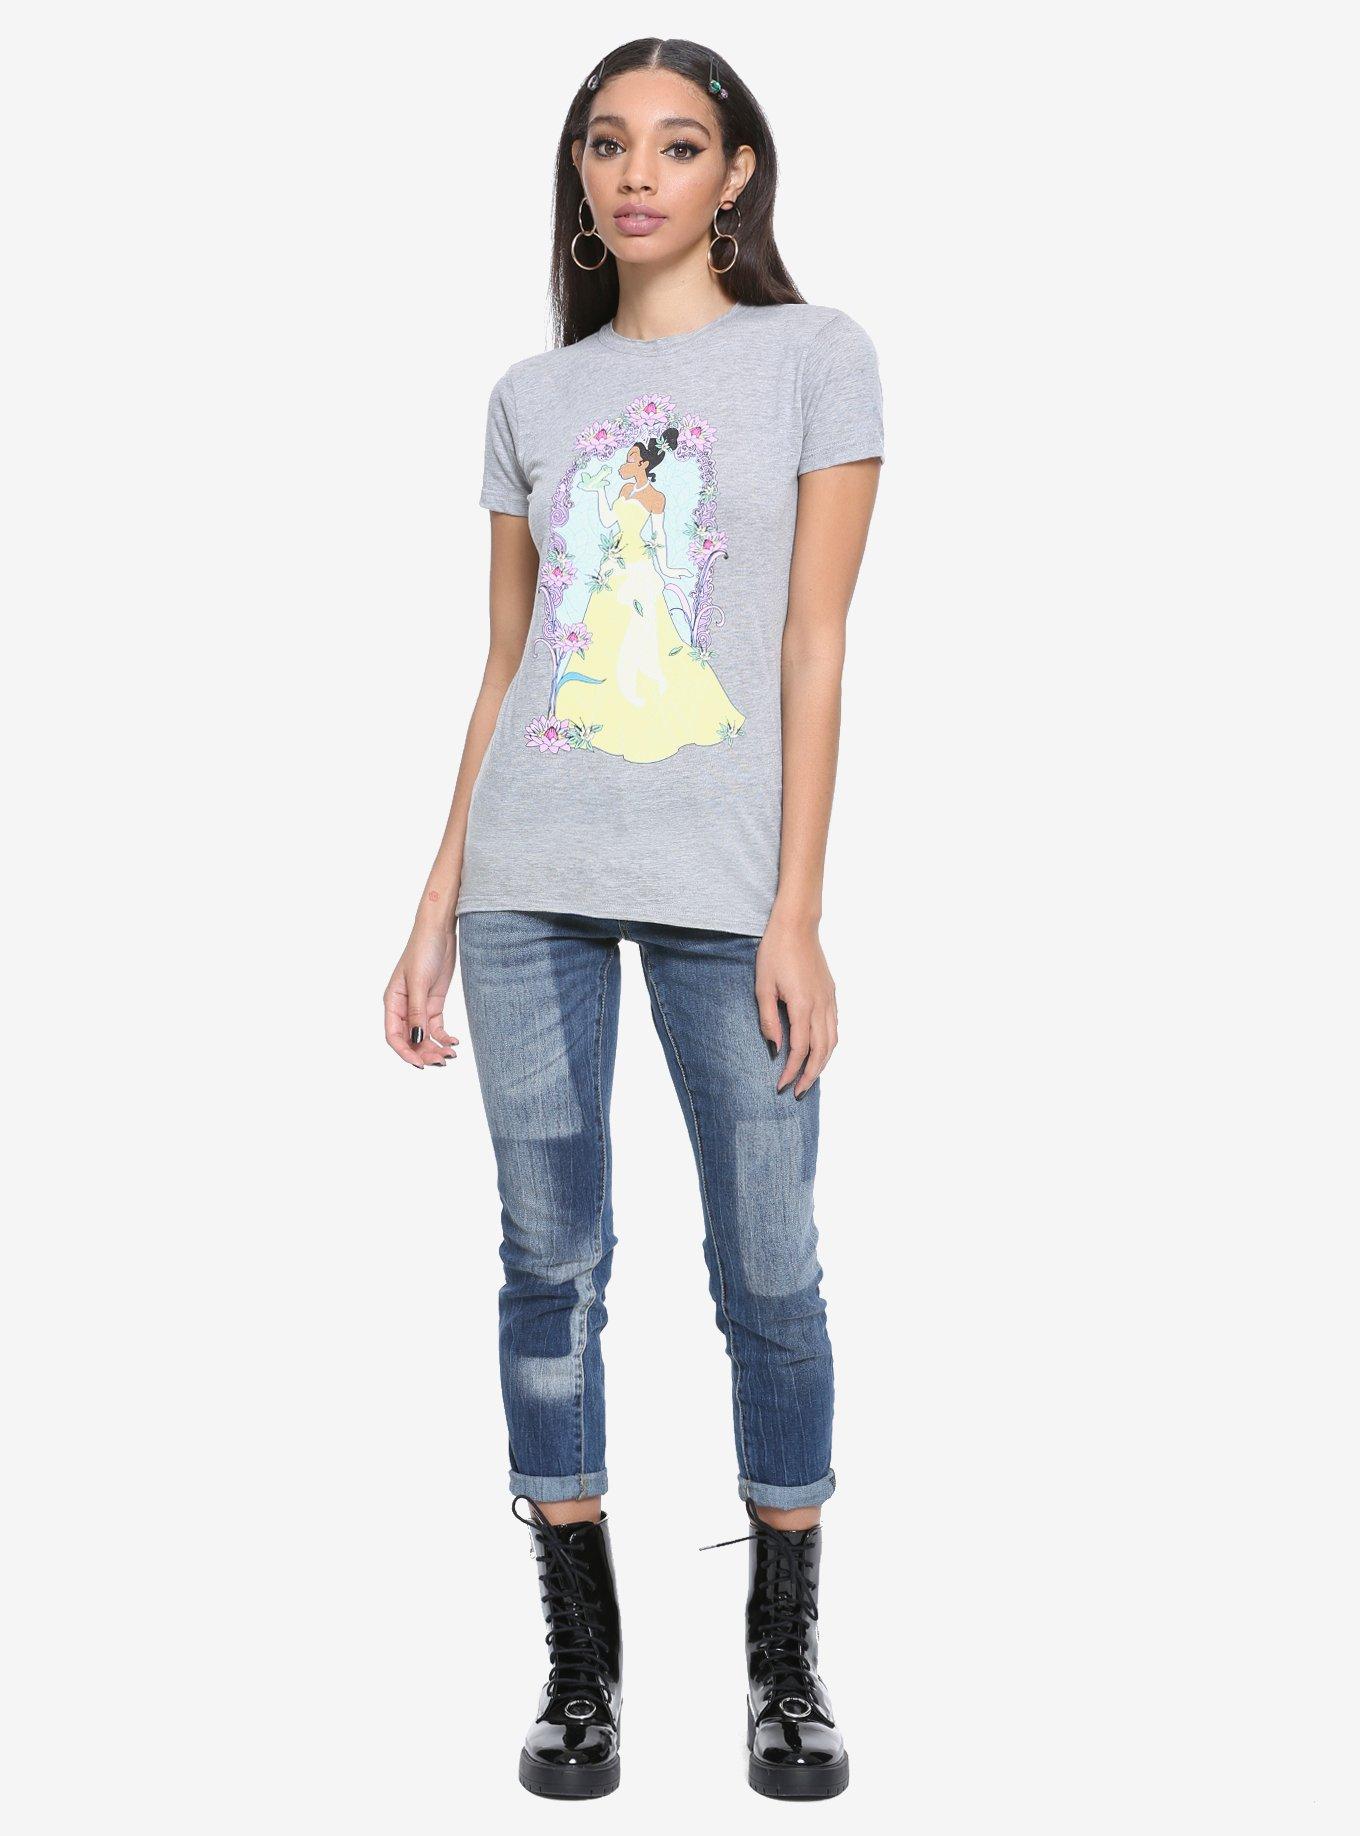 Disney The Princess And The Frog Floral Girls T-Shirt, GREY, alternate